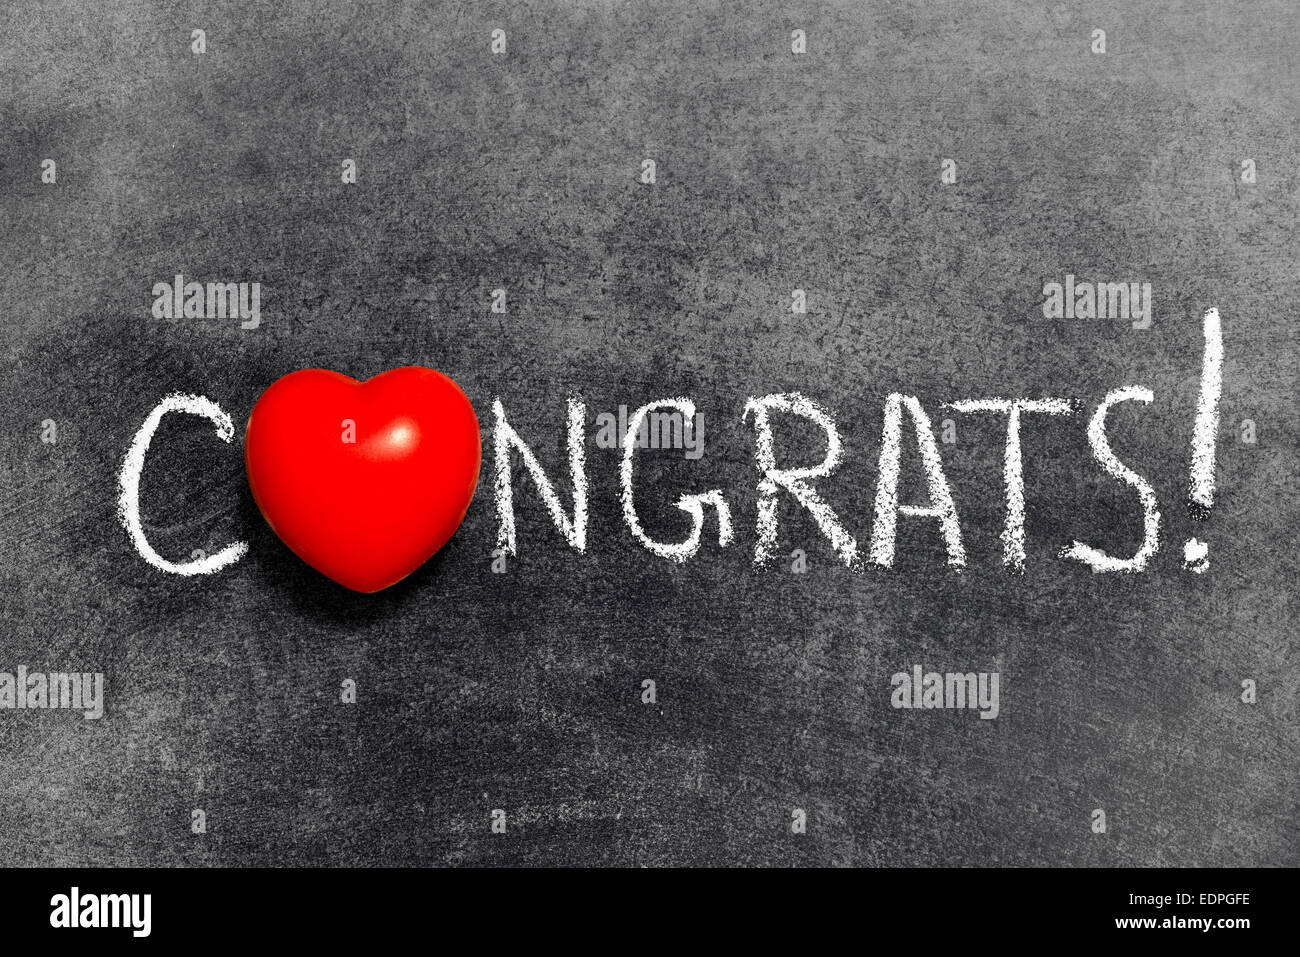 congrats exclamation handwritten on blackboard with heart symbol instead of O Stock Photo